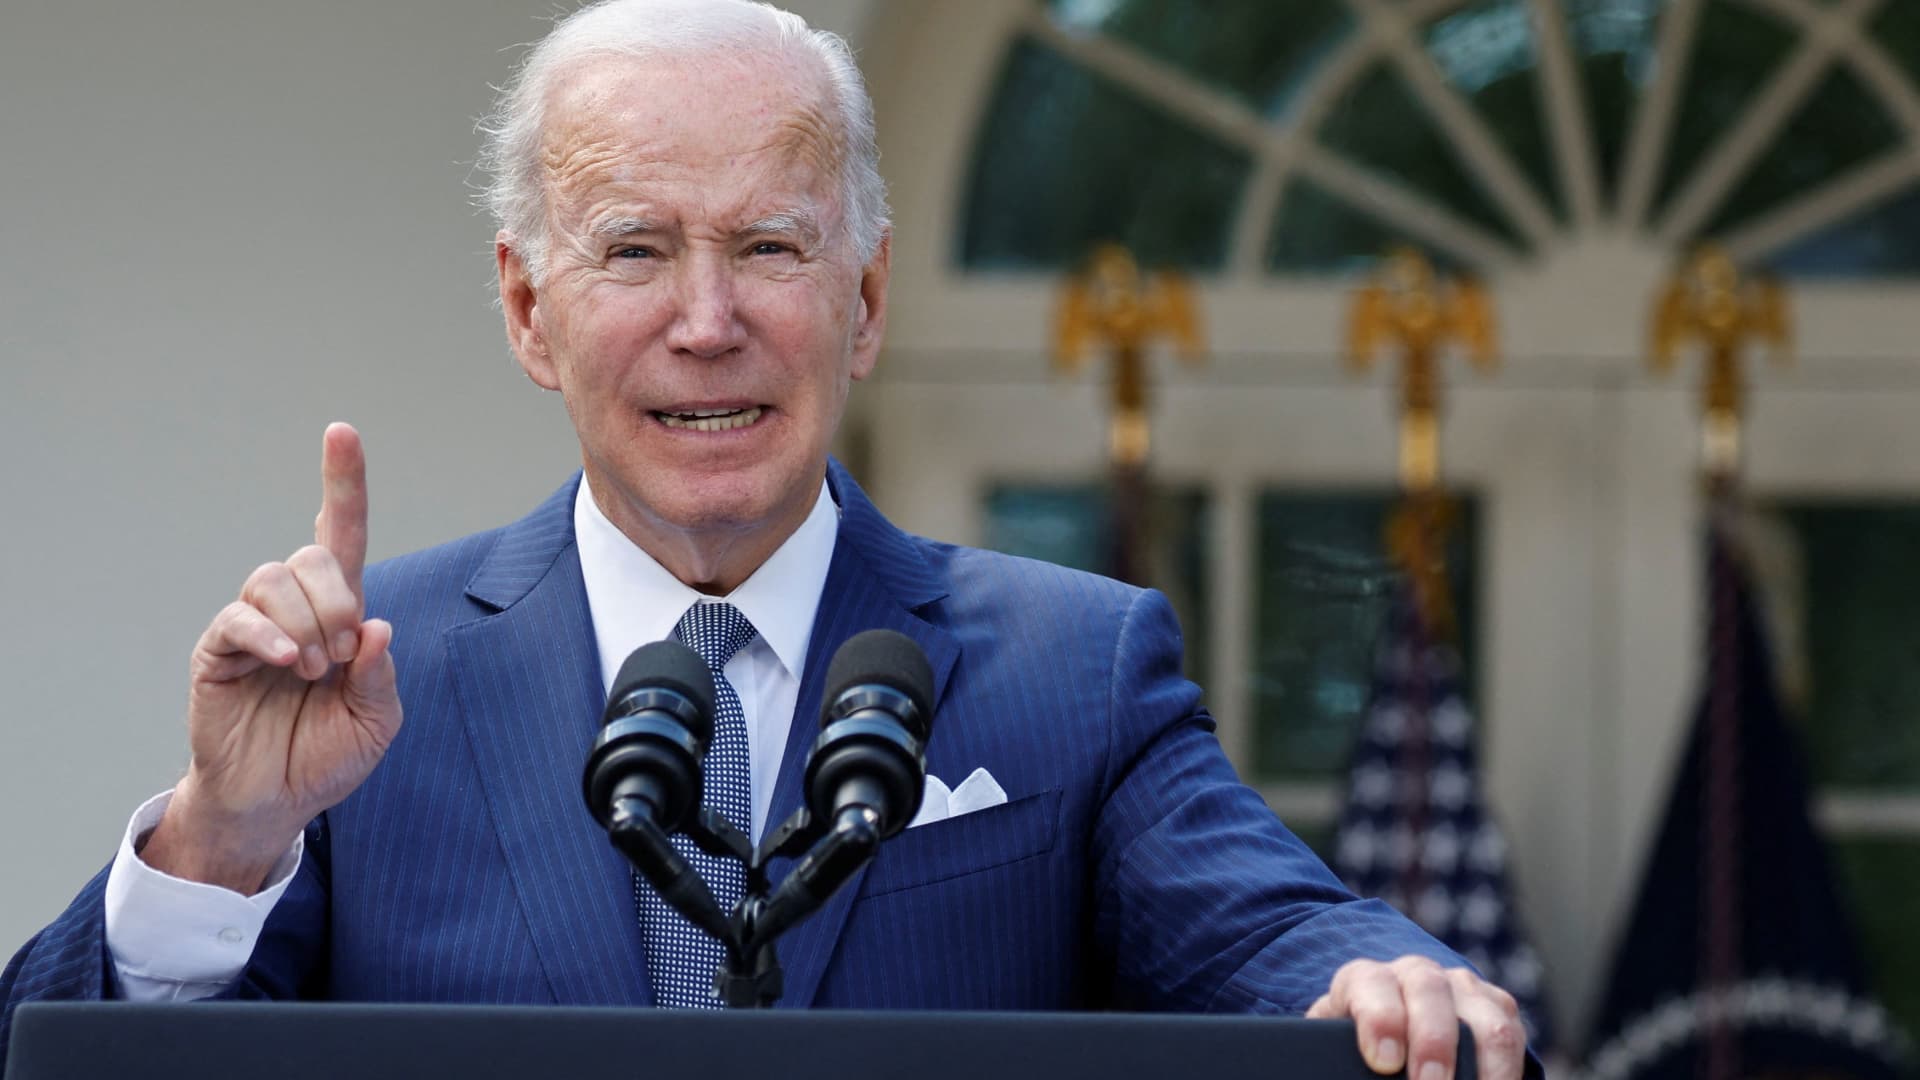 U.S. President Joe Biden speaks at an event on health care costs, Medicare and Social Security, in the Rose Garden at the White House in Washington, September 27, 2022.